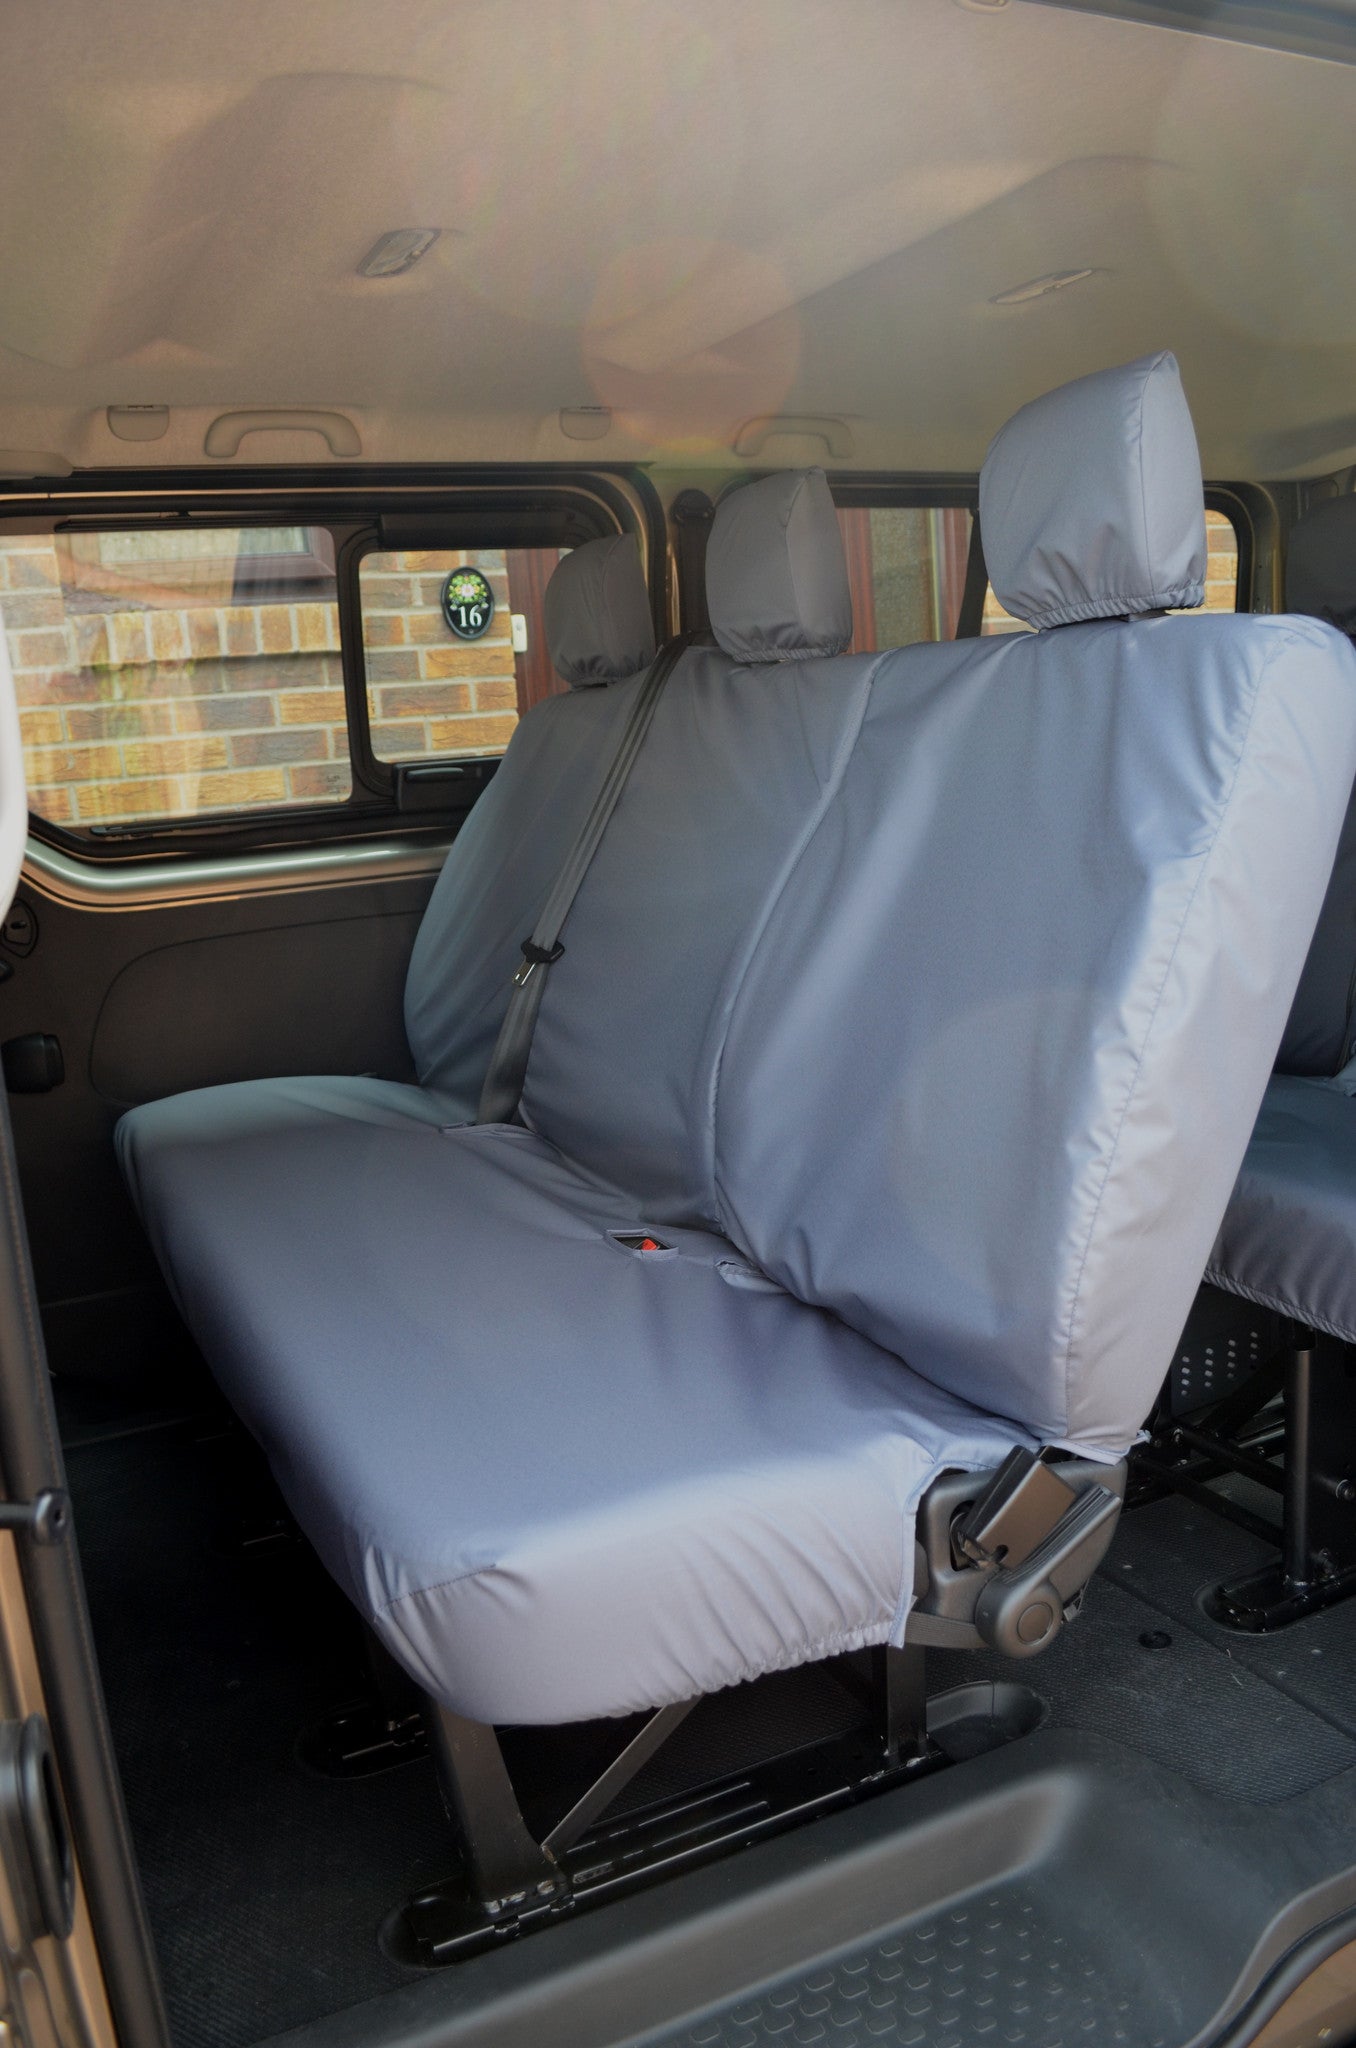 Renault Trafic Passenger 2006 - 2014 Seat Covers  Turtle Covers Ltd